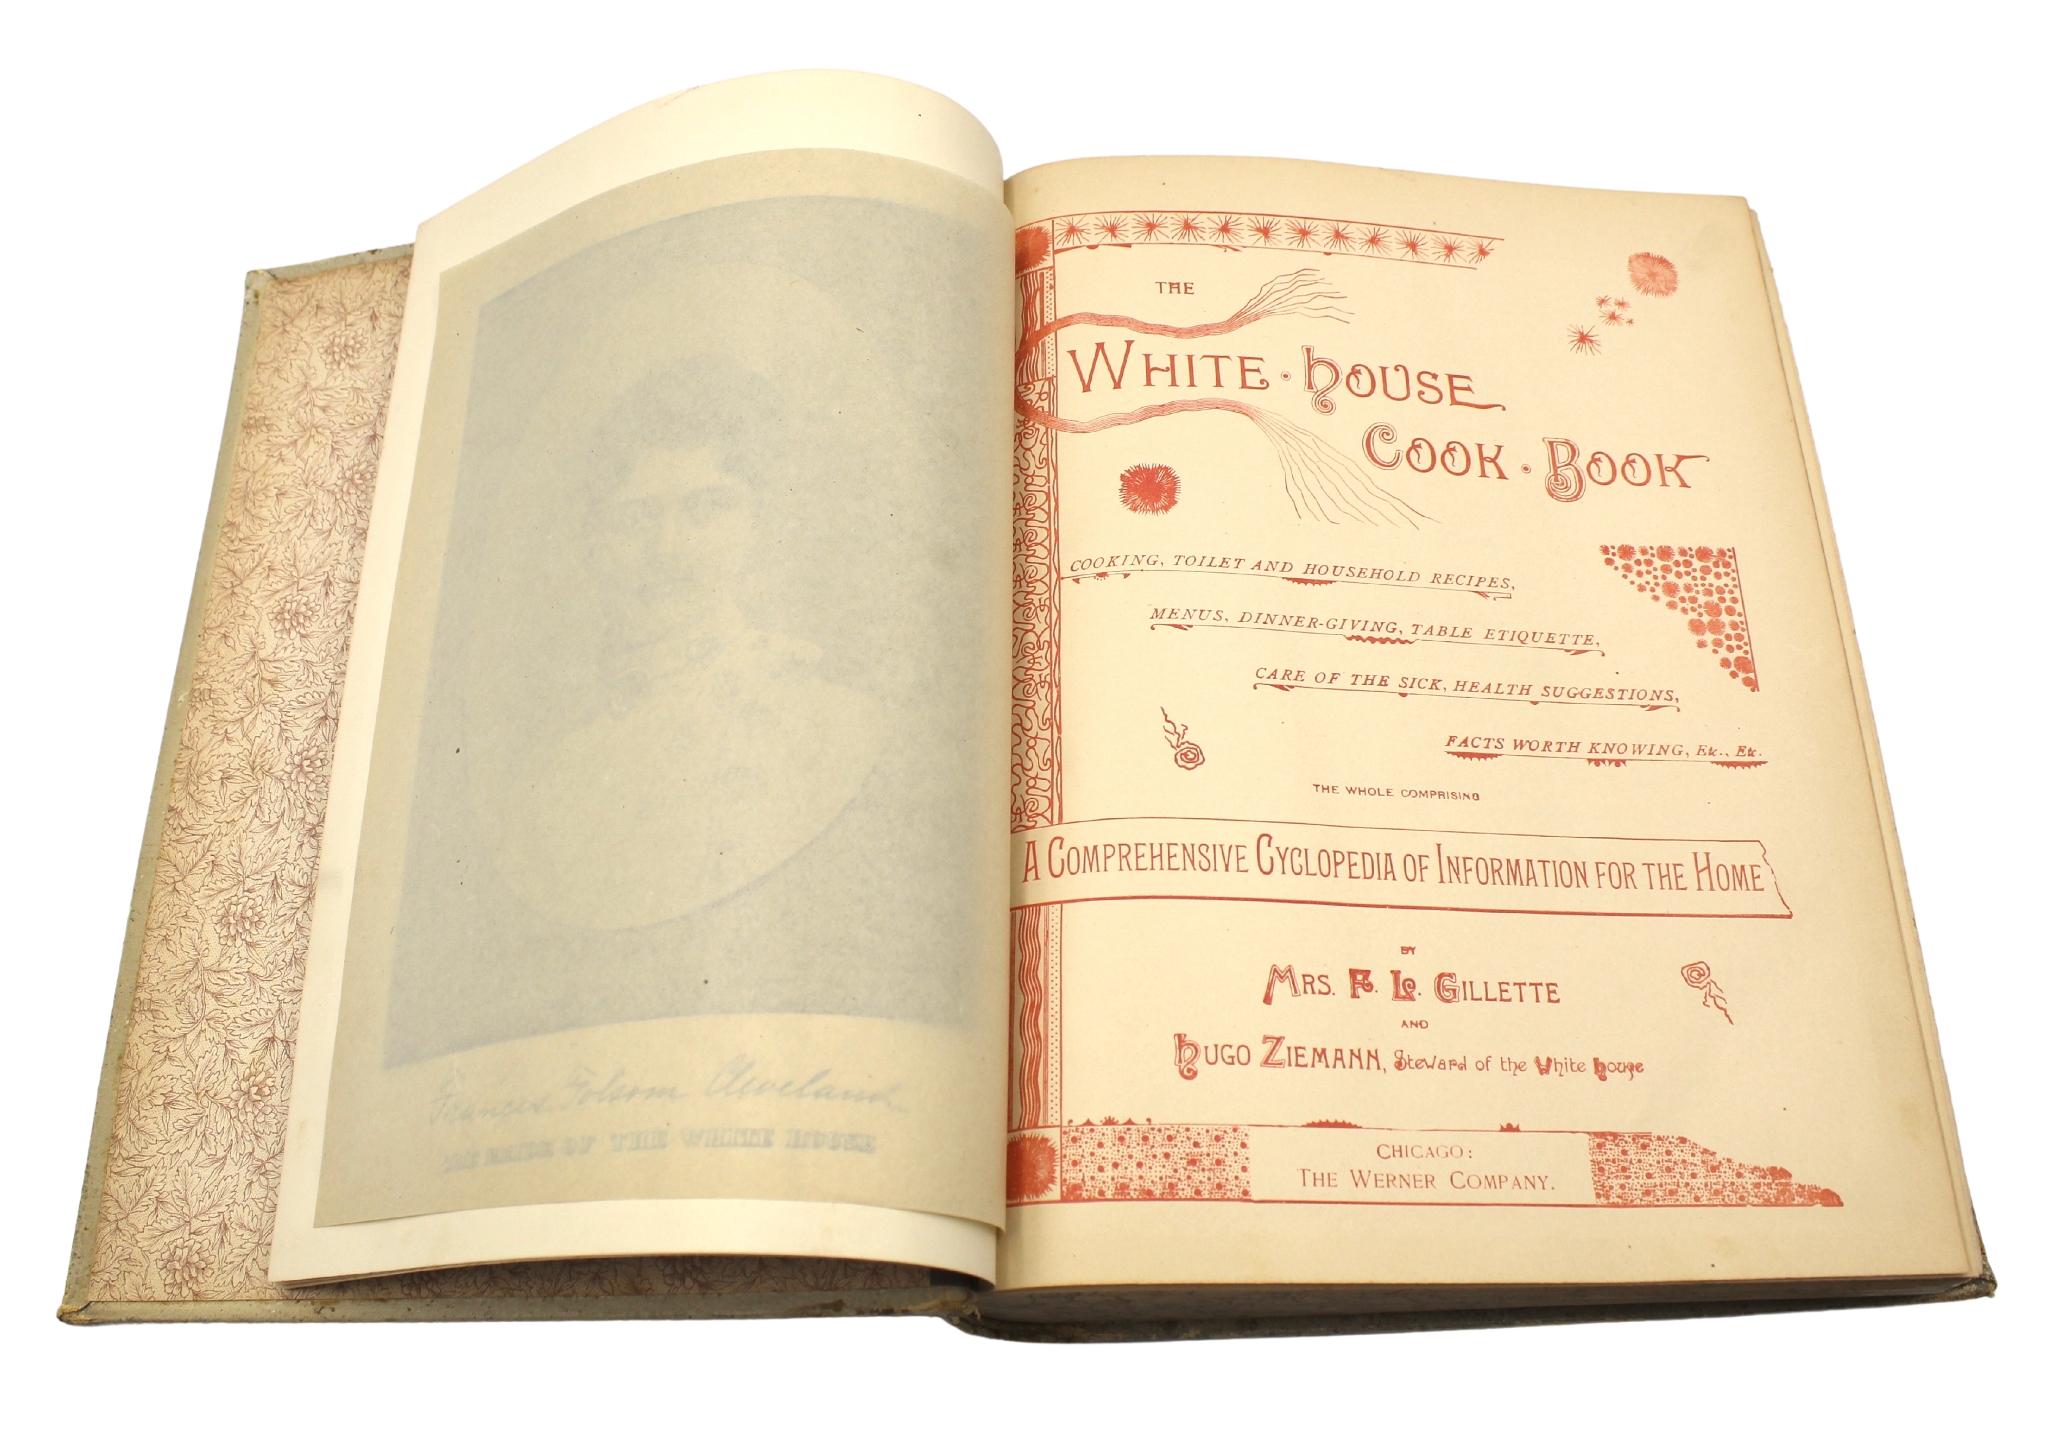 The White House Cookbook by F. L. Gillette, Later Printing, 1894 In Good Condition For Sale In Colorado Springs, CO